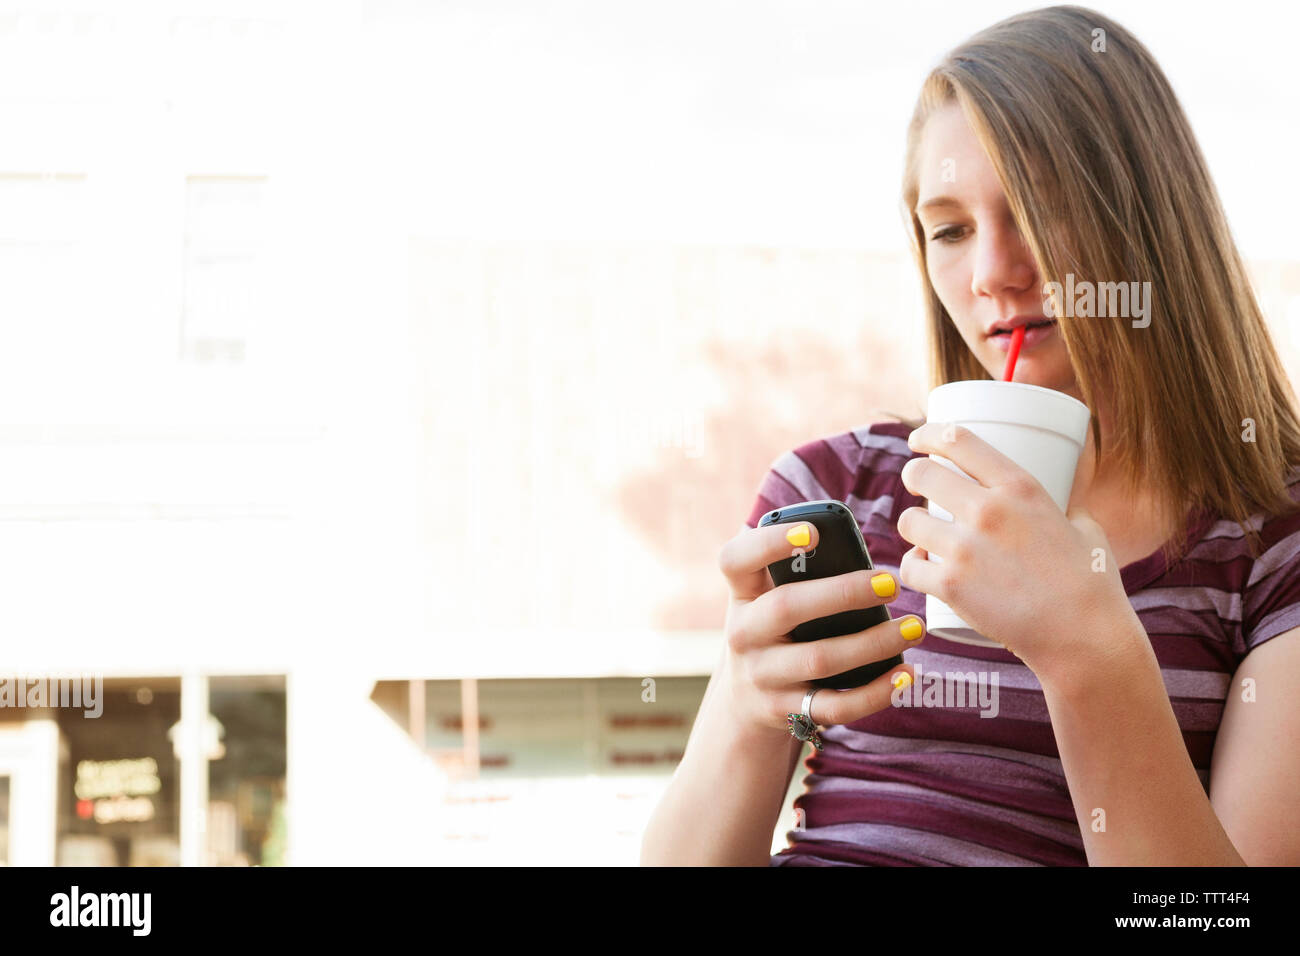 Teenage girl using mobile phone while sipping drink Stock Photo